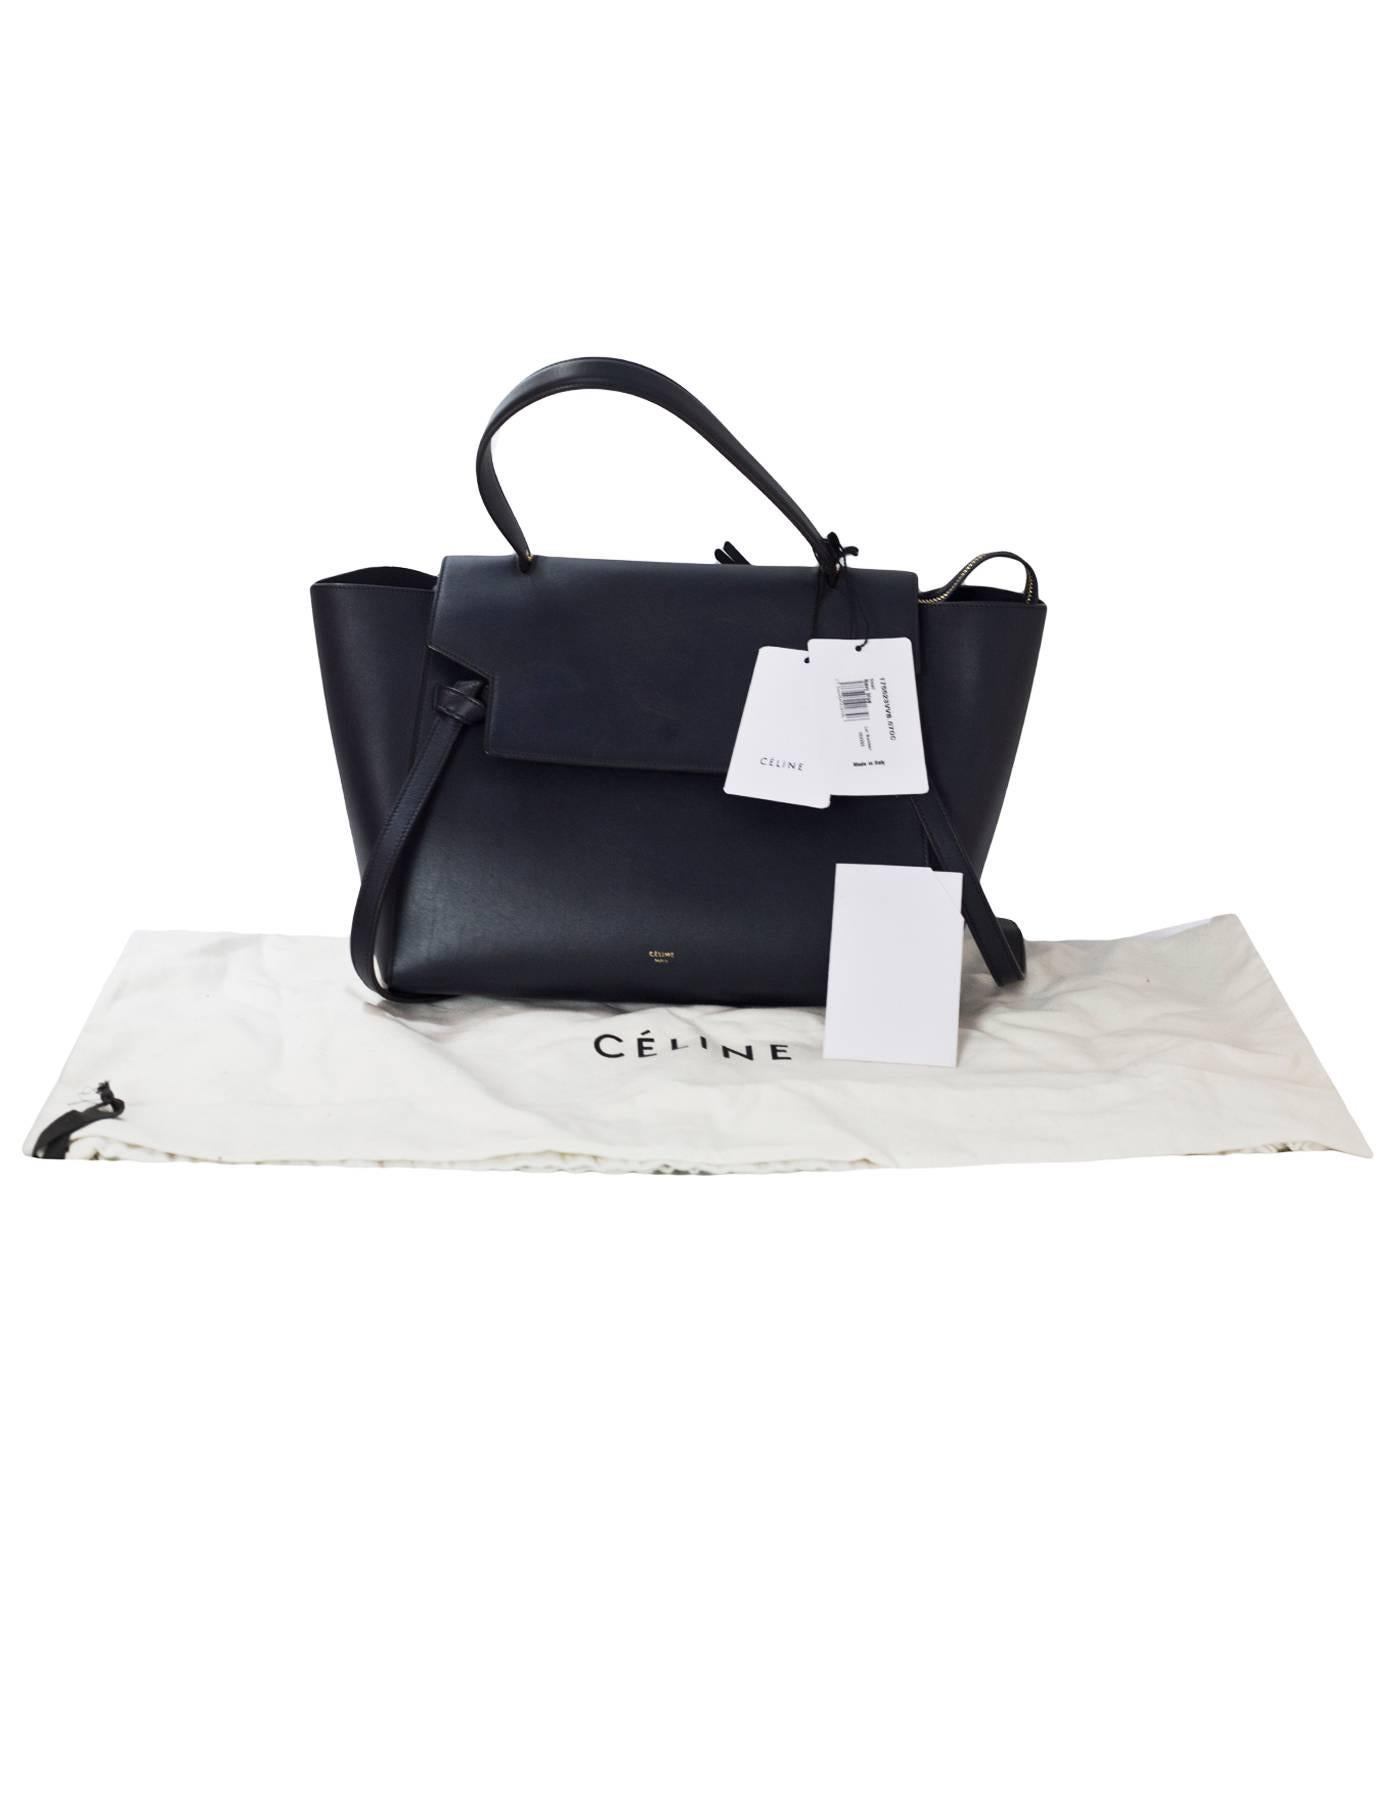 Celine Navy Smooth Leather Small Belt Bag with Dust Bag 2